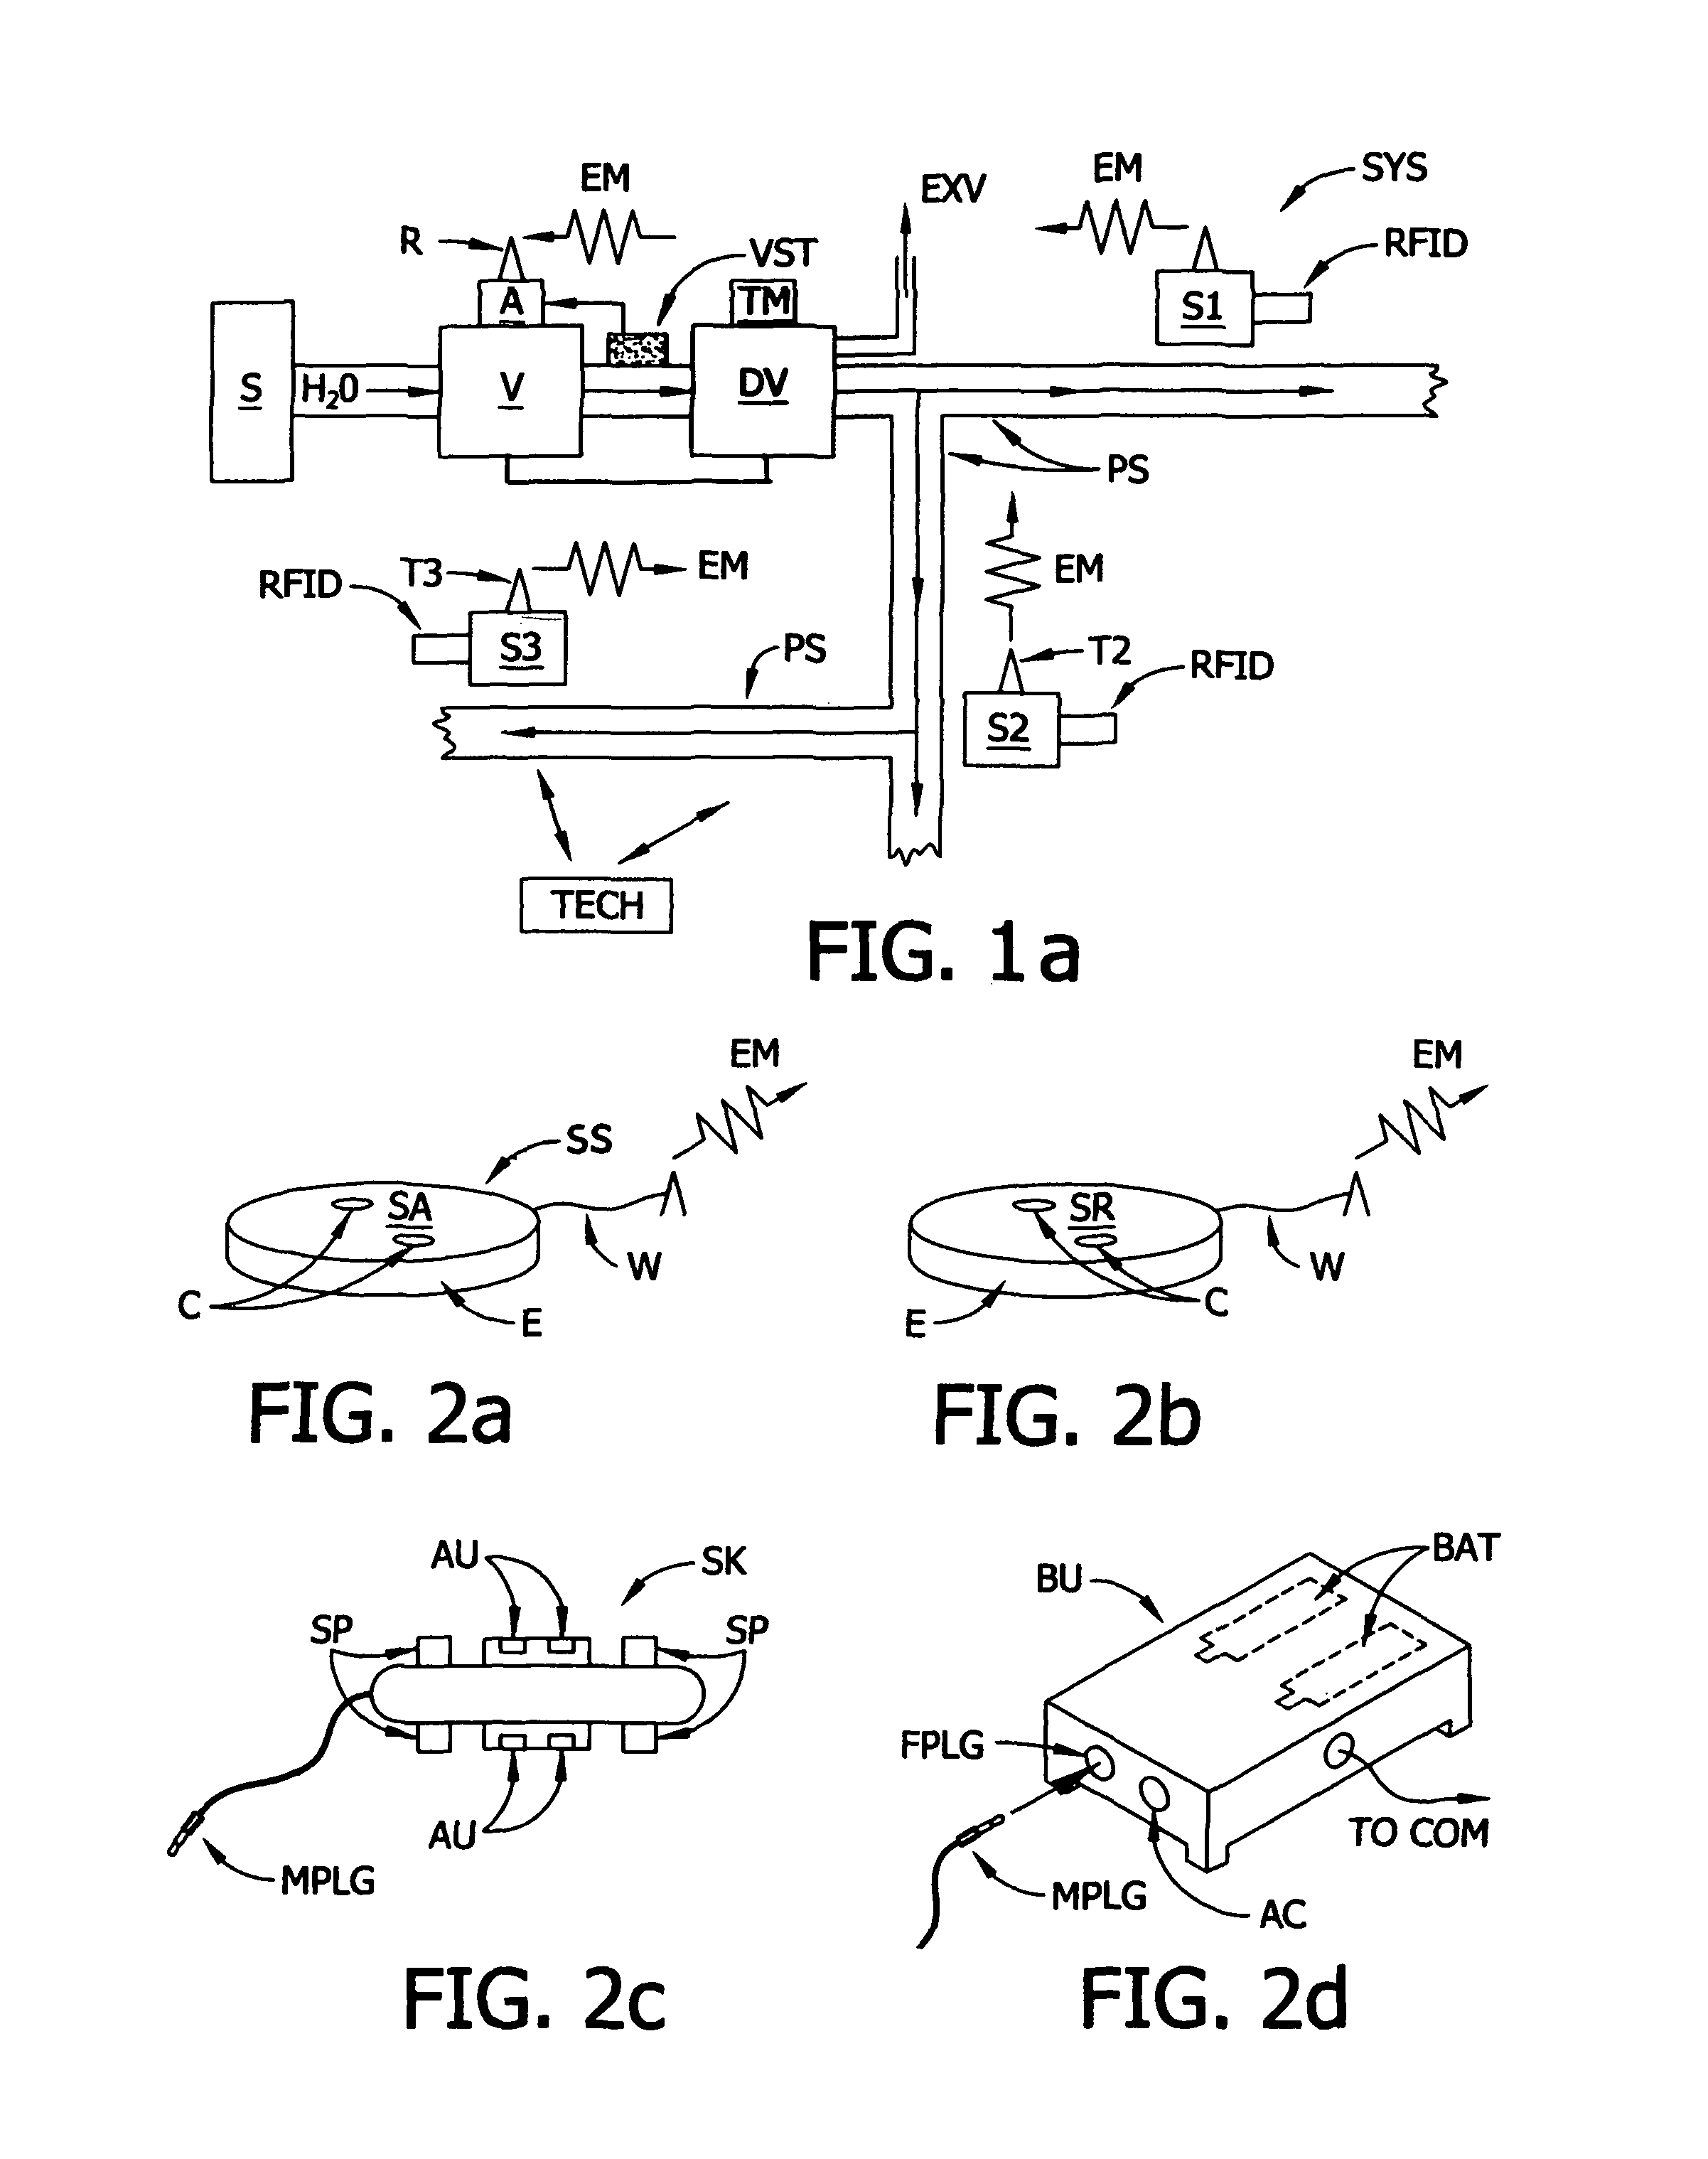 Flood preventing system, and method of use